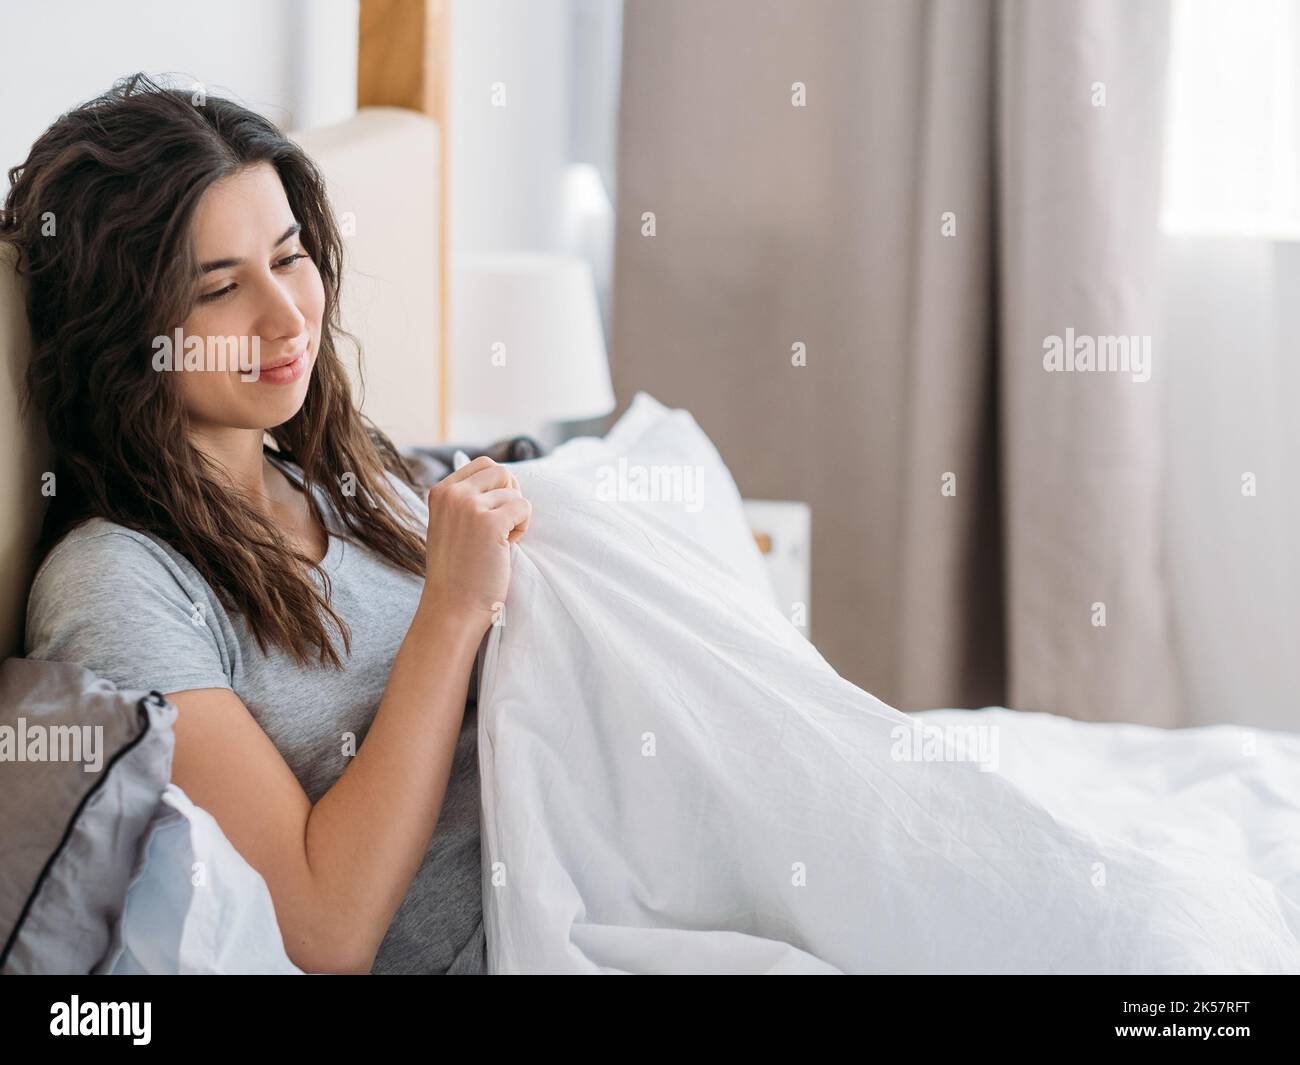 Romantic morning. Home rest. Pleasure inspiration. Relaxed pensive daydreaming brunette woman smiling in cozy bed with blanket in light bedroom. Stock Photo